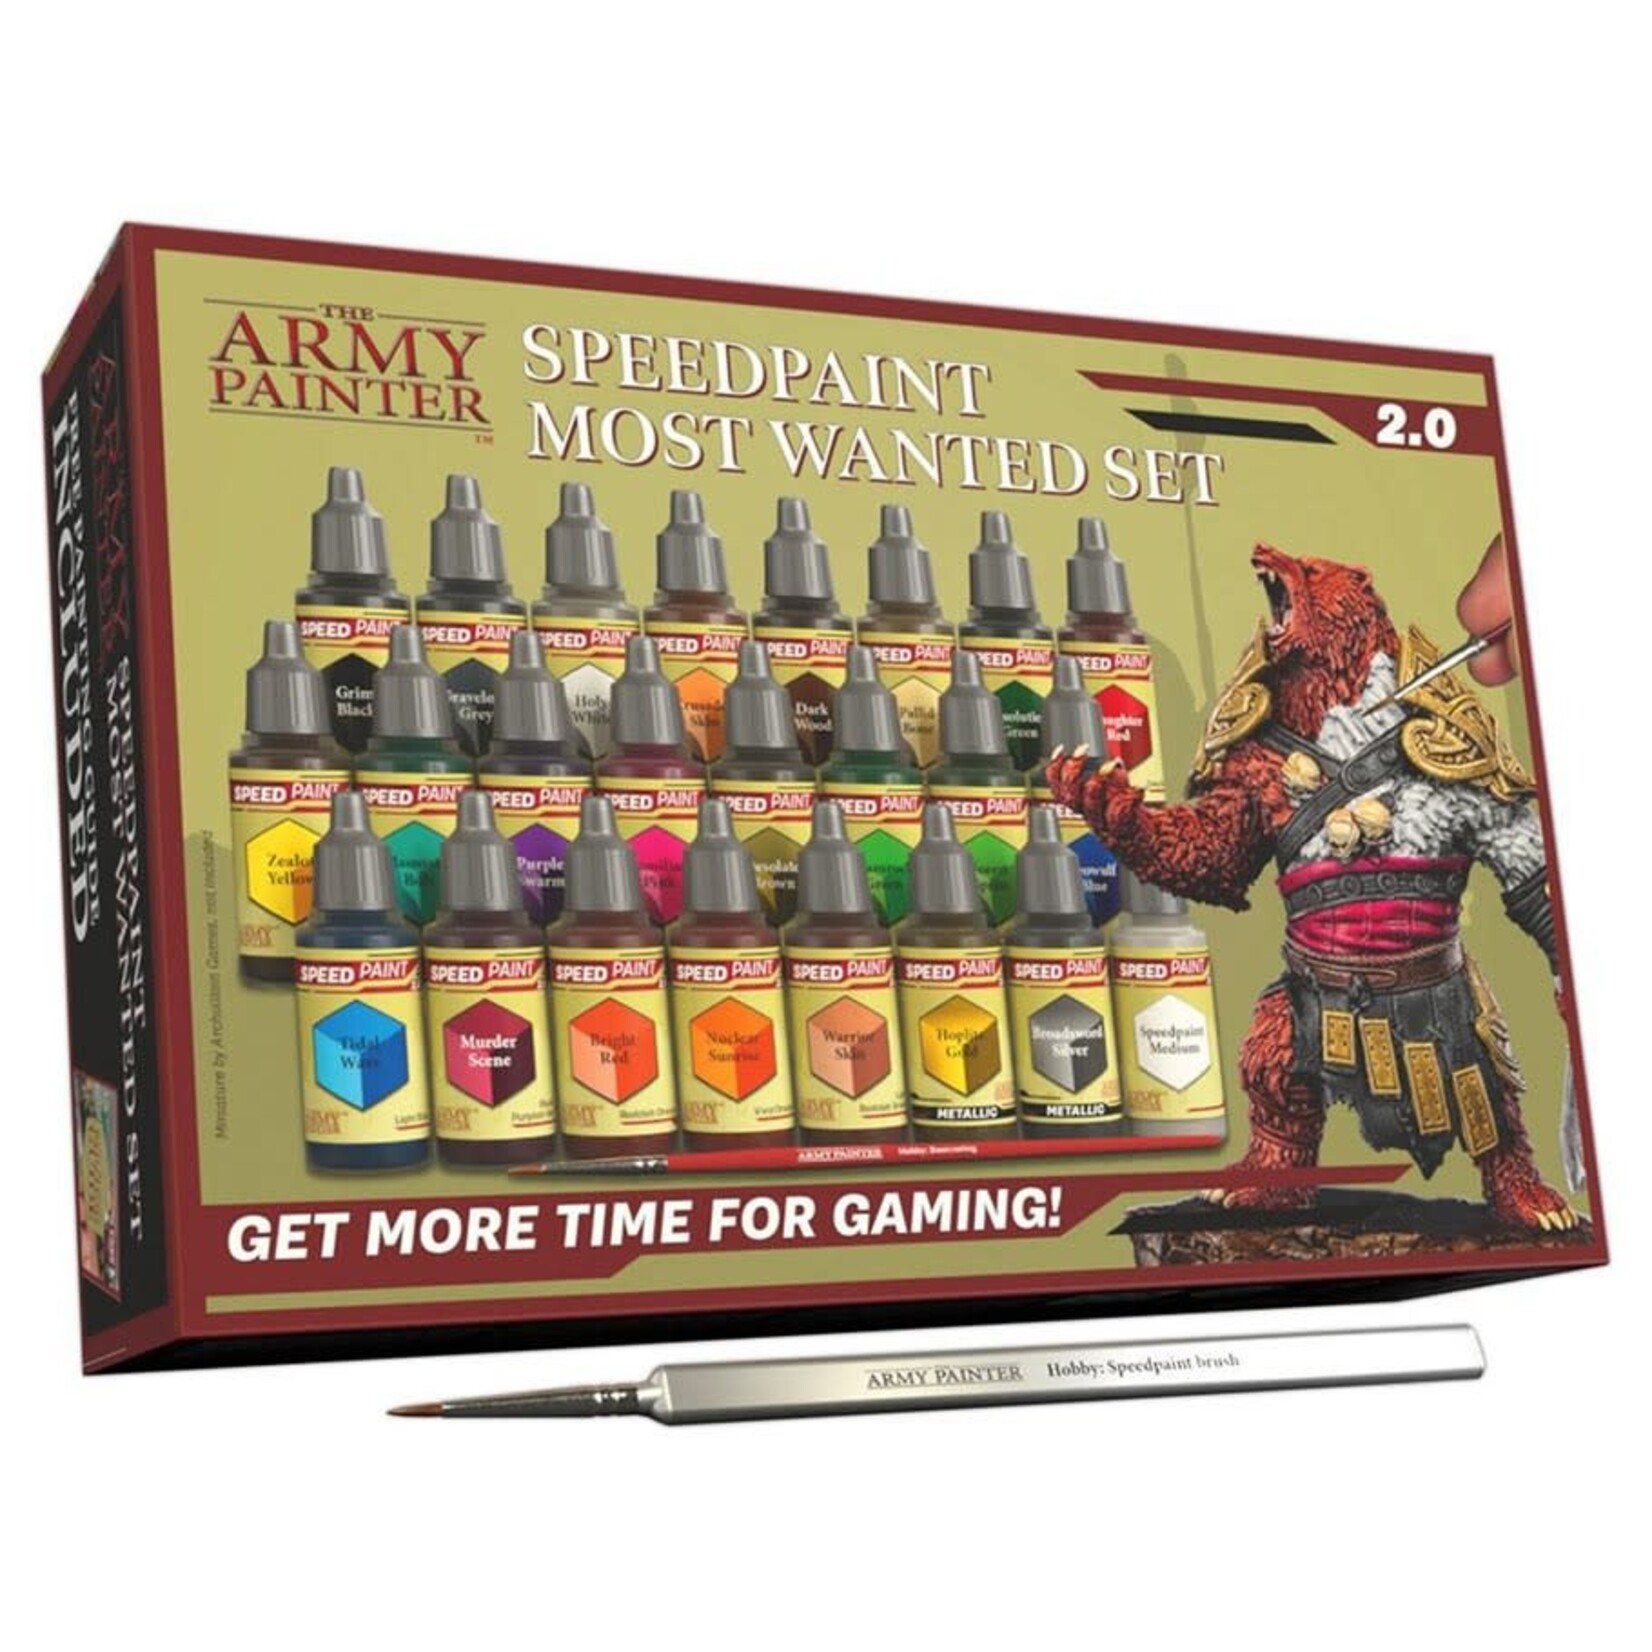 The Army Painter Speedpaint 2.0 Most Wanted Set